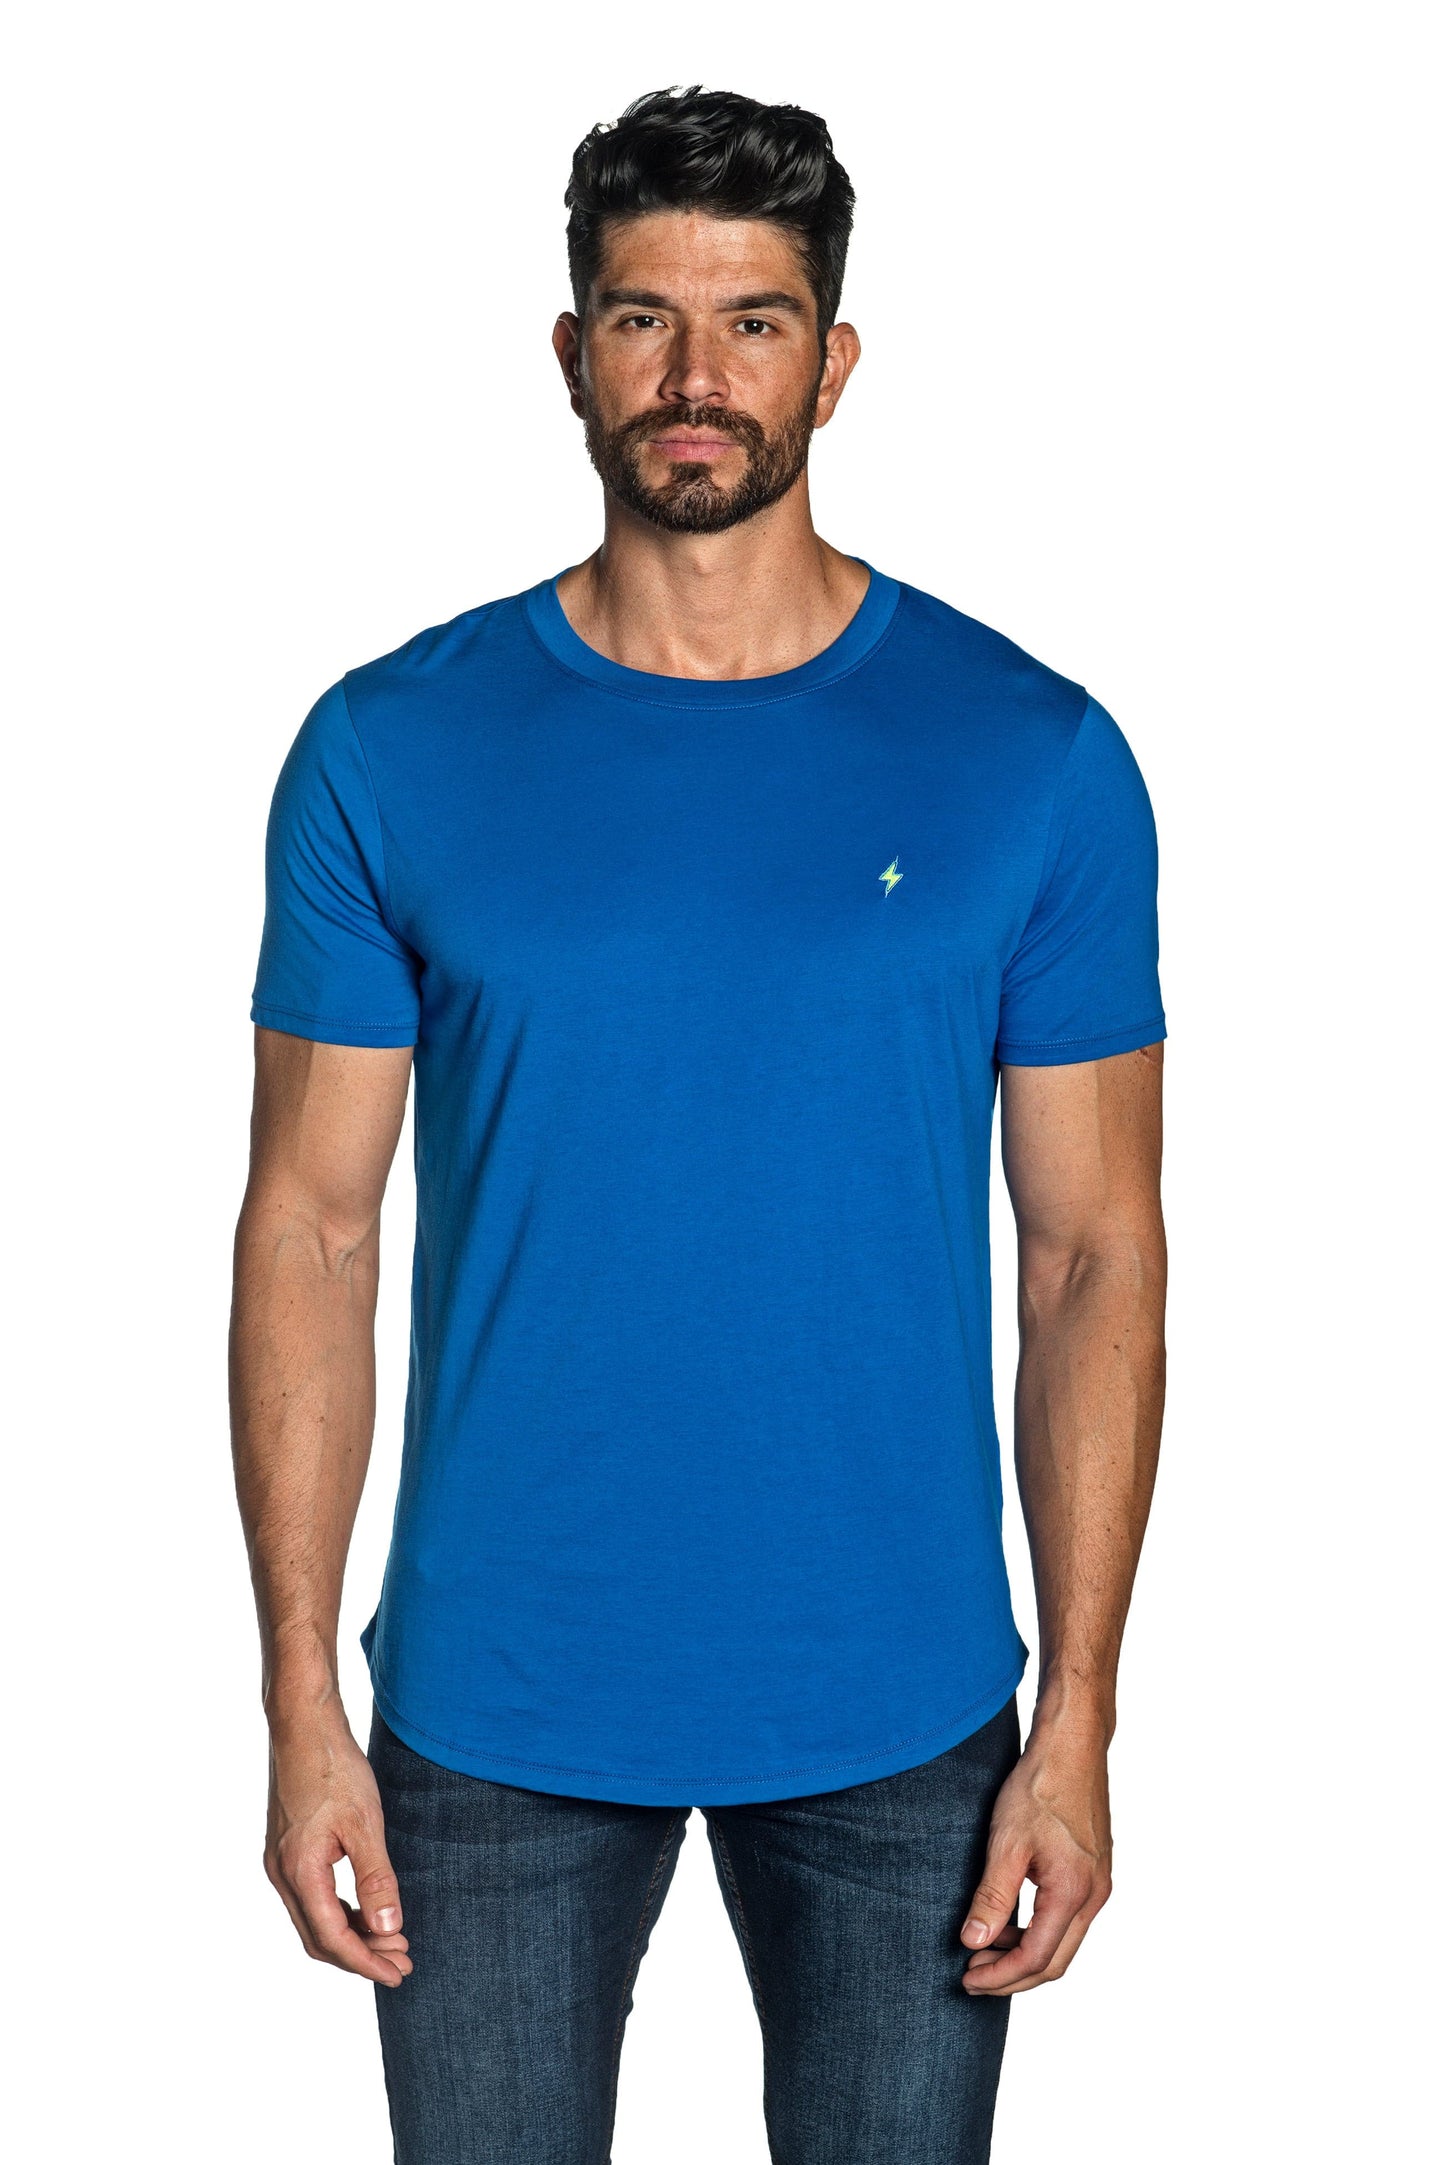 Blue Mens Tee With Lightning Embroidery TEE-38.